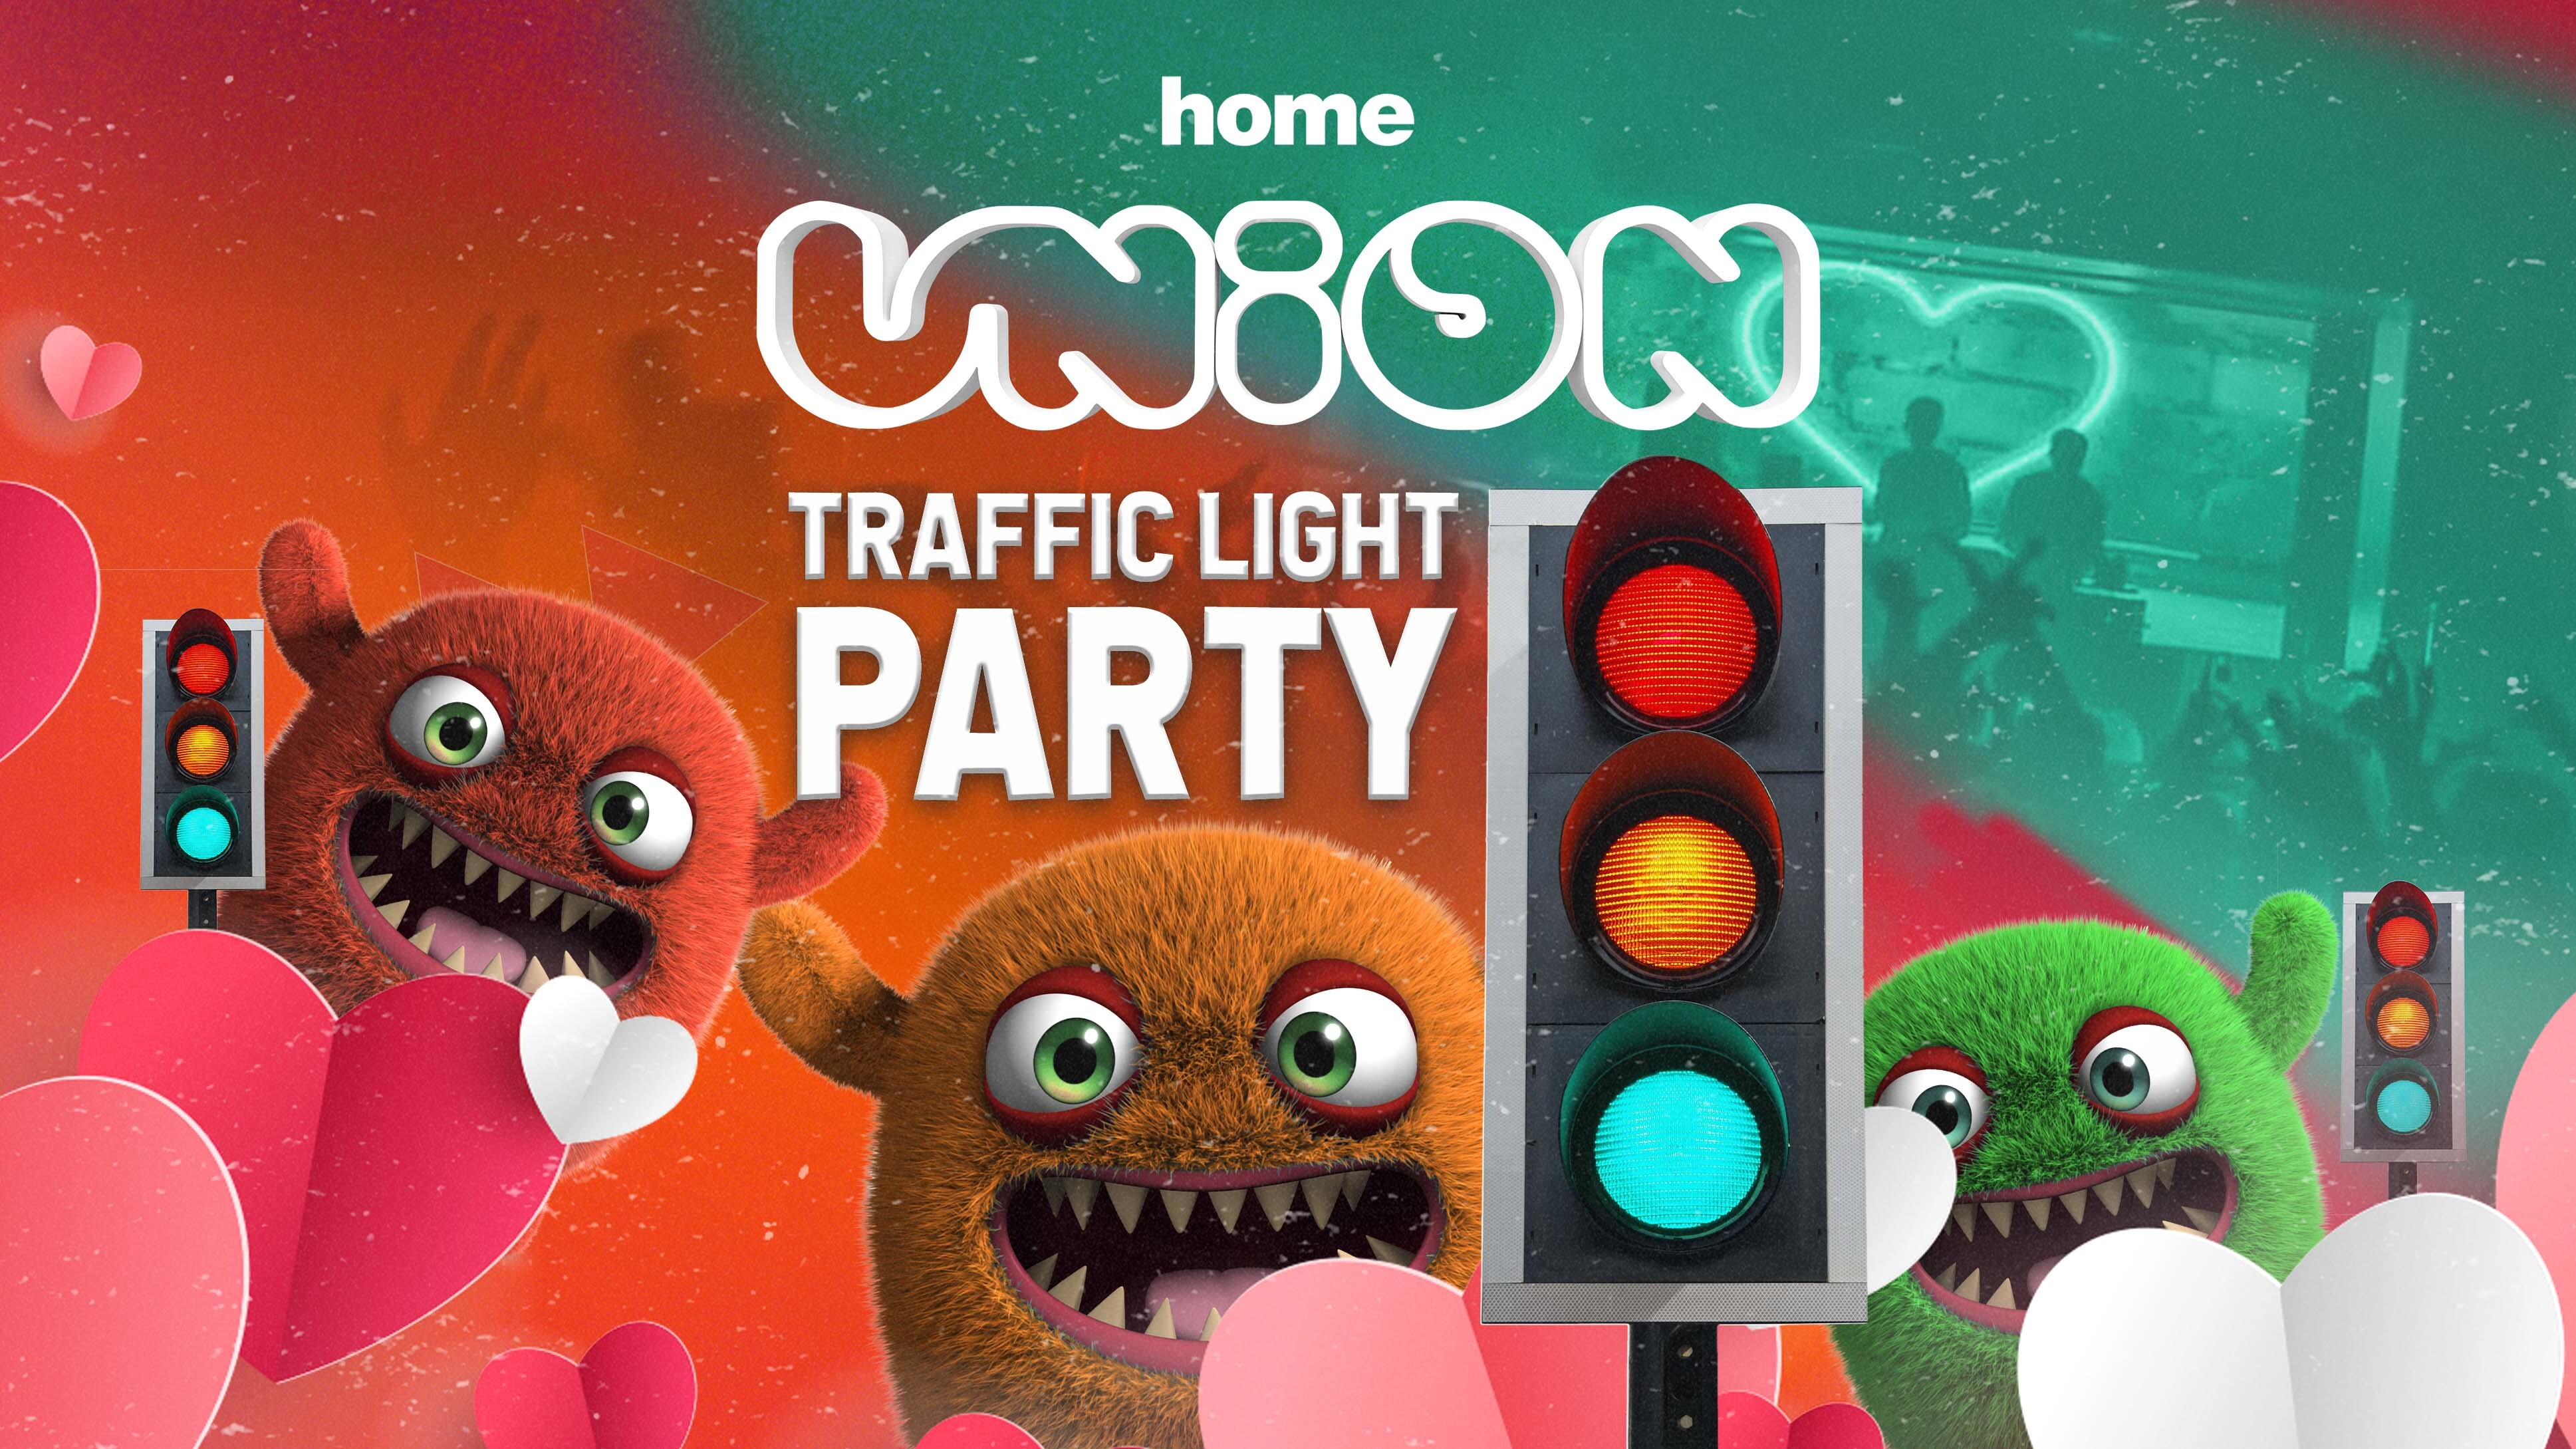 UNION TUESDAY’S PRESENTS THE TRAFFIC LIGHT PARTY